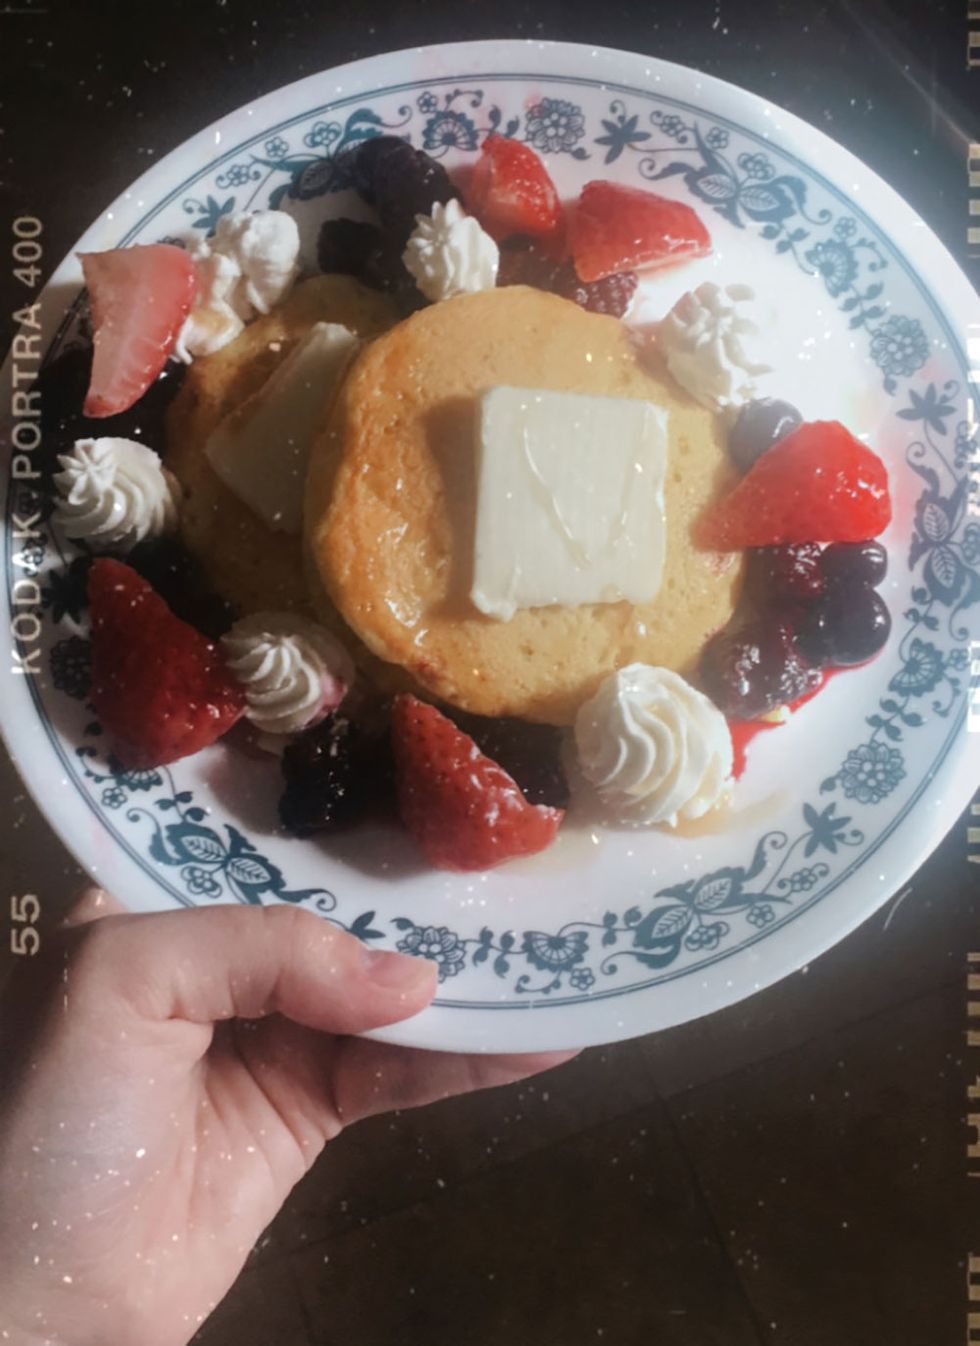 “Last weekend I made super fluffy pancakes. I did manage to do a bit of food photography as well.”